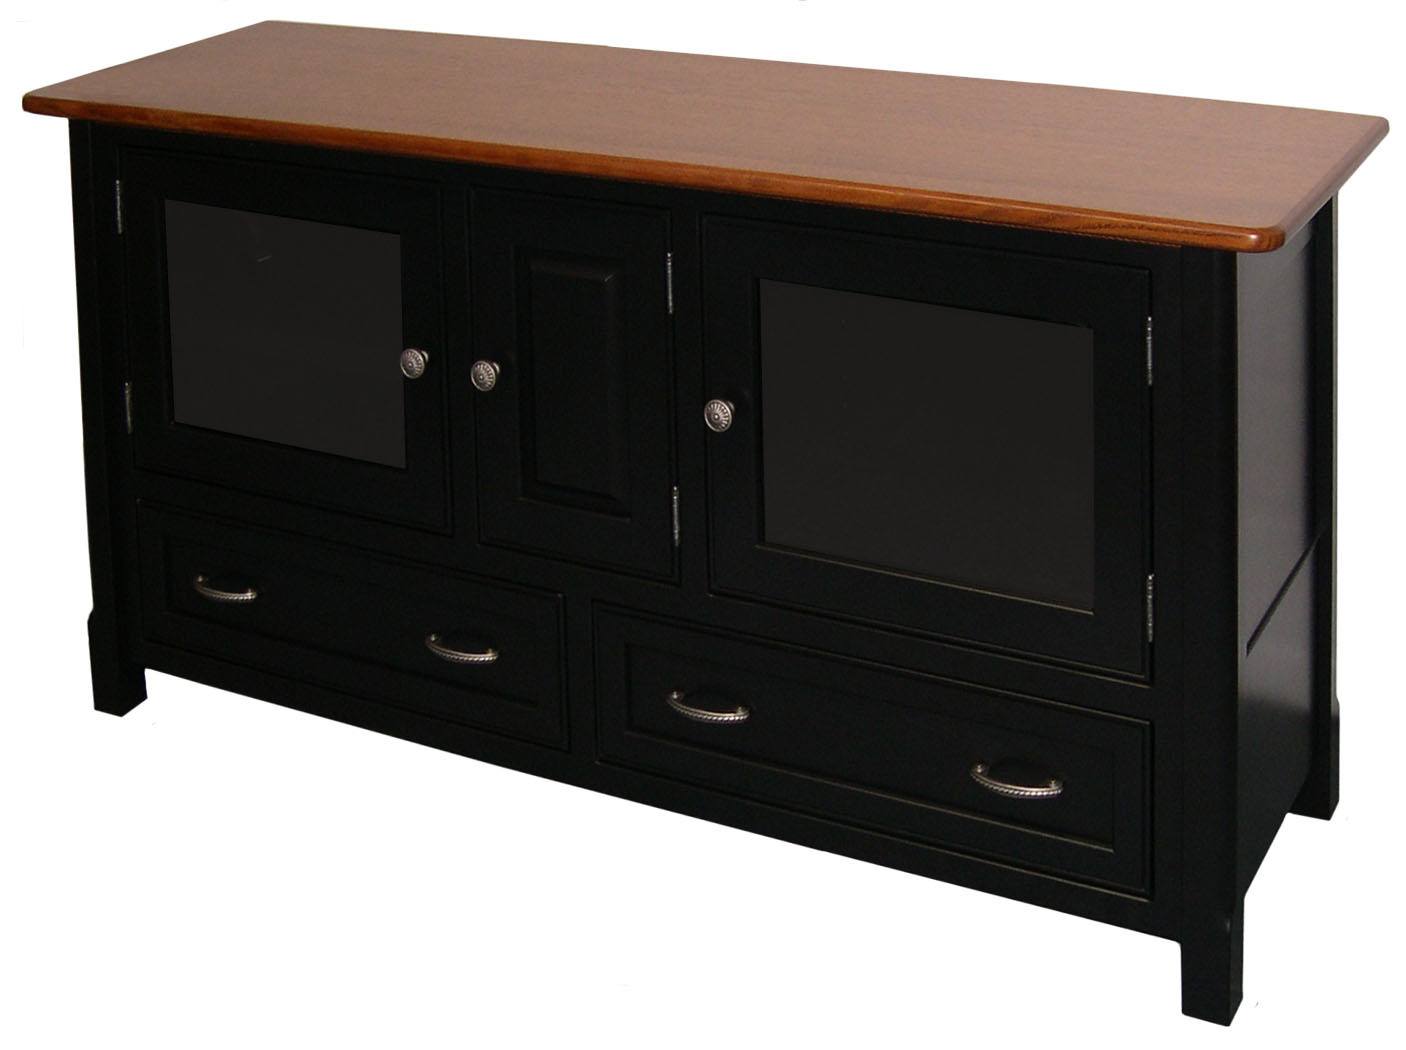 TV Cabinets and TV Stands